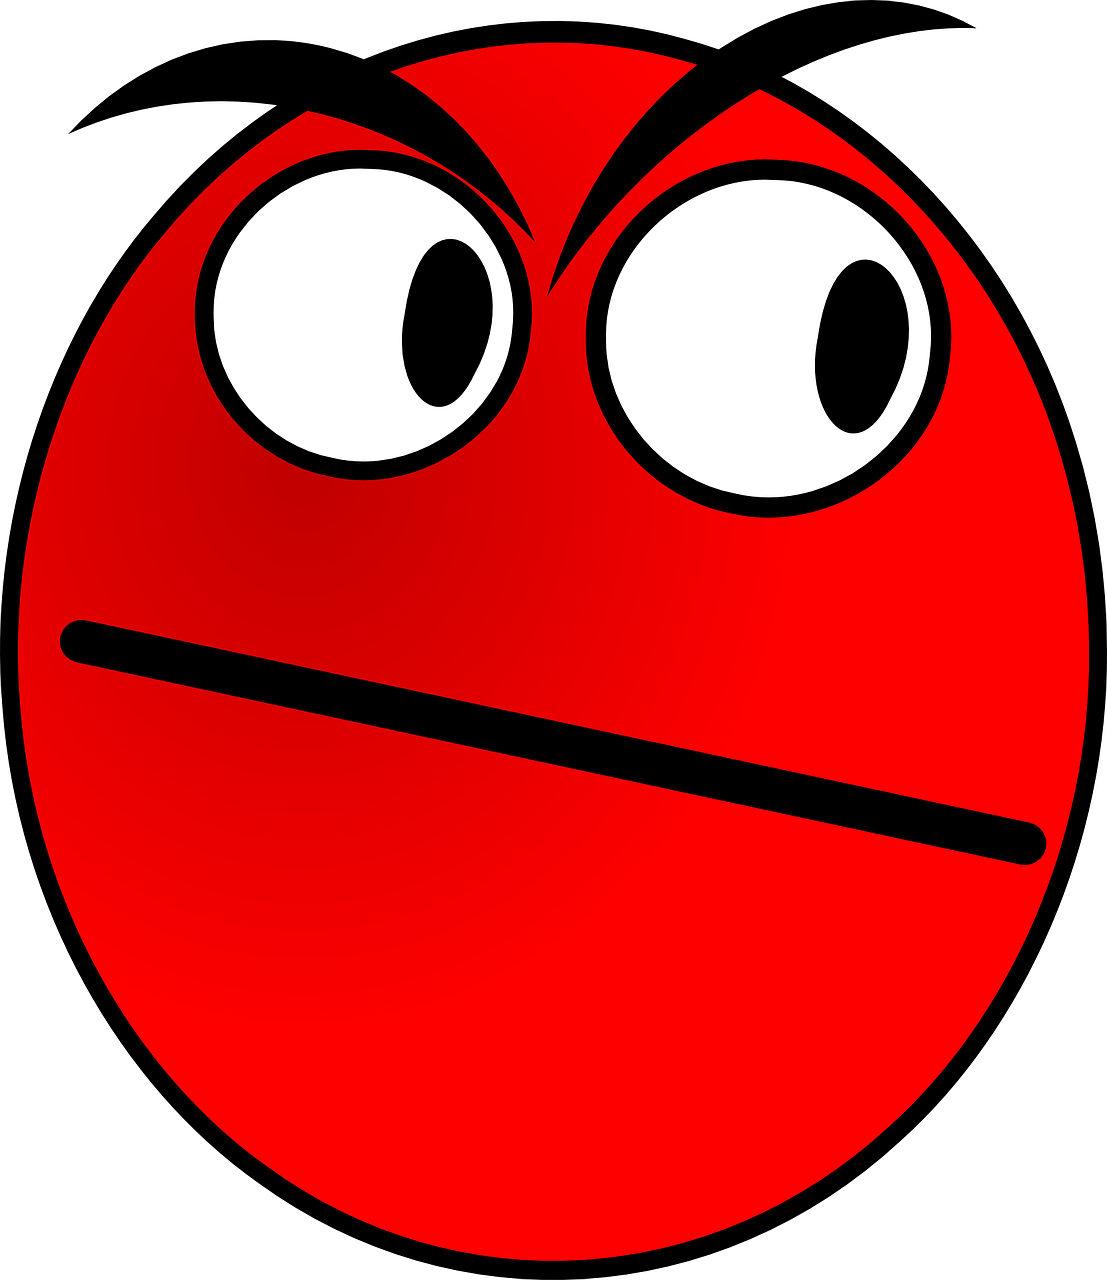 Download free photo of Angry, smiley face, icon, expression, emoticon